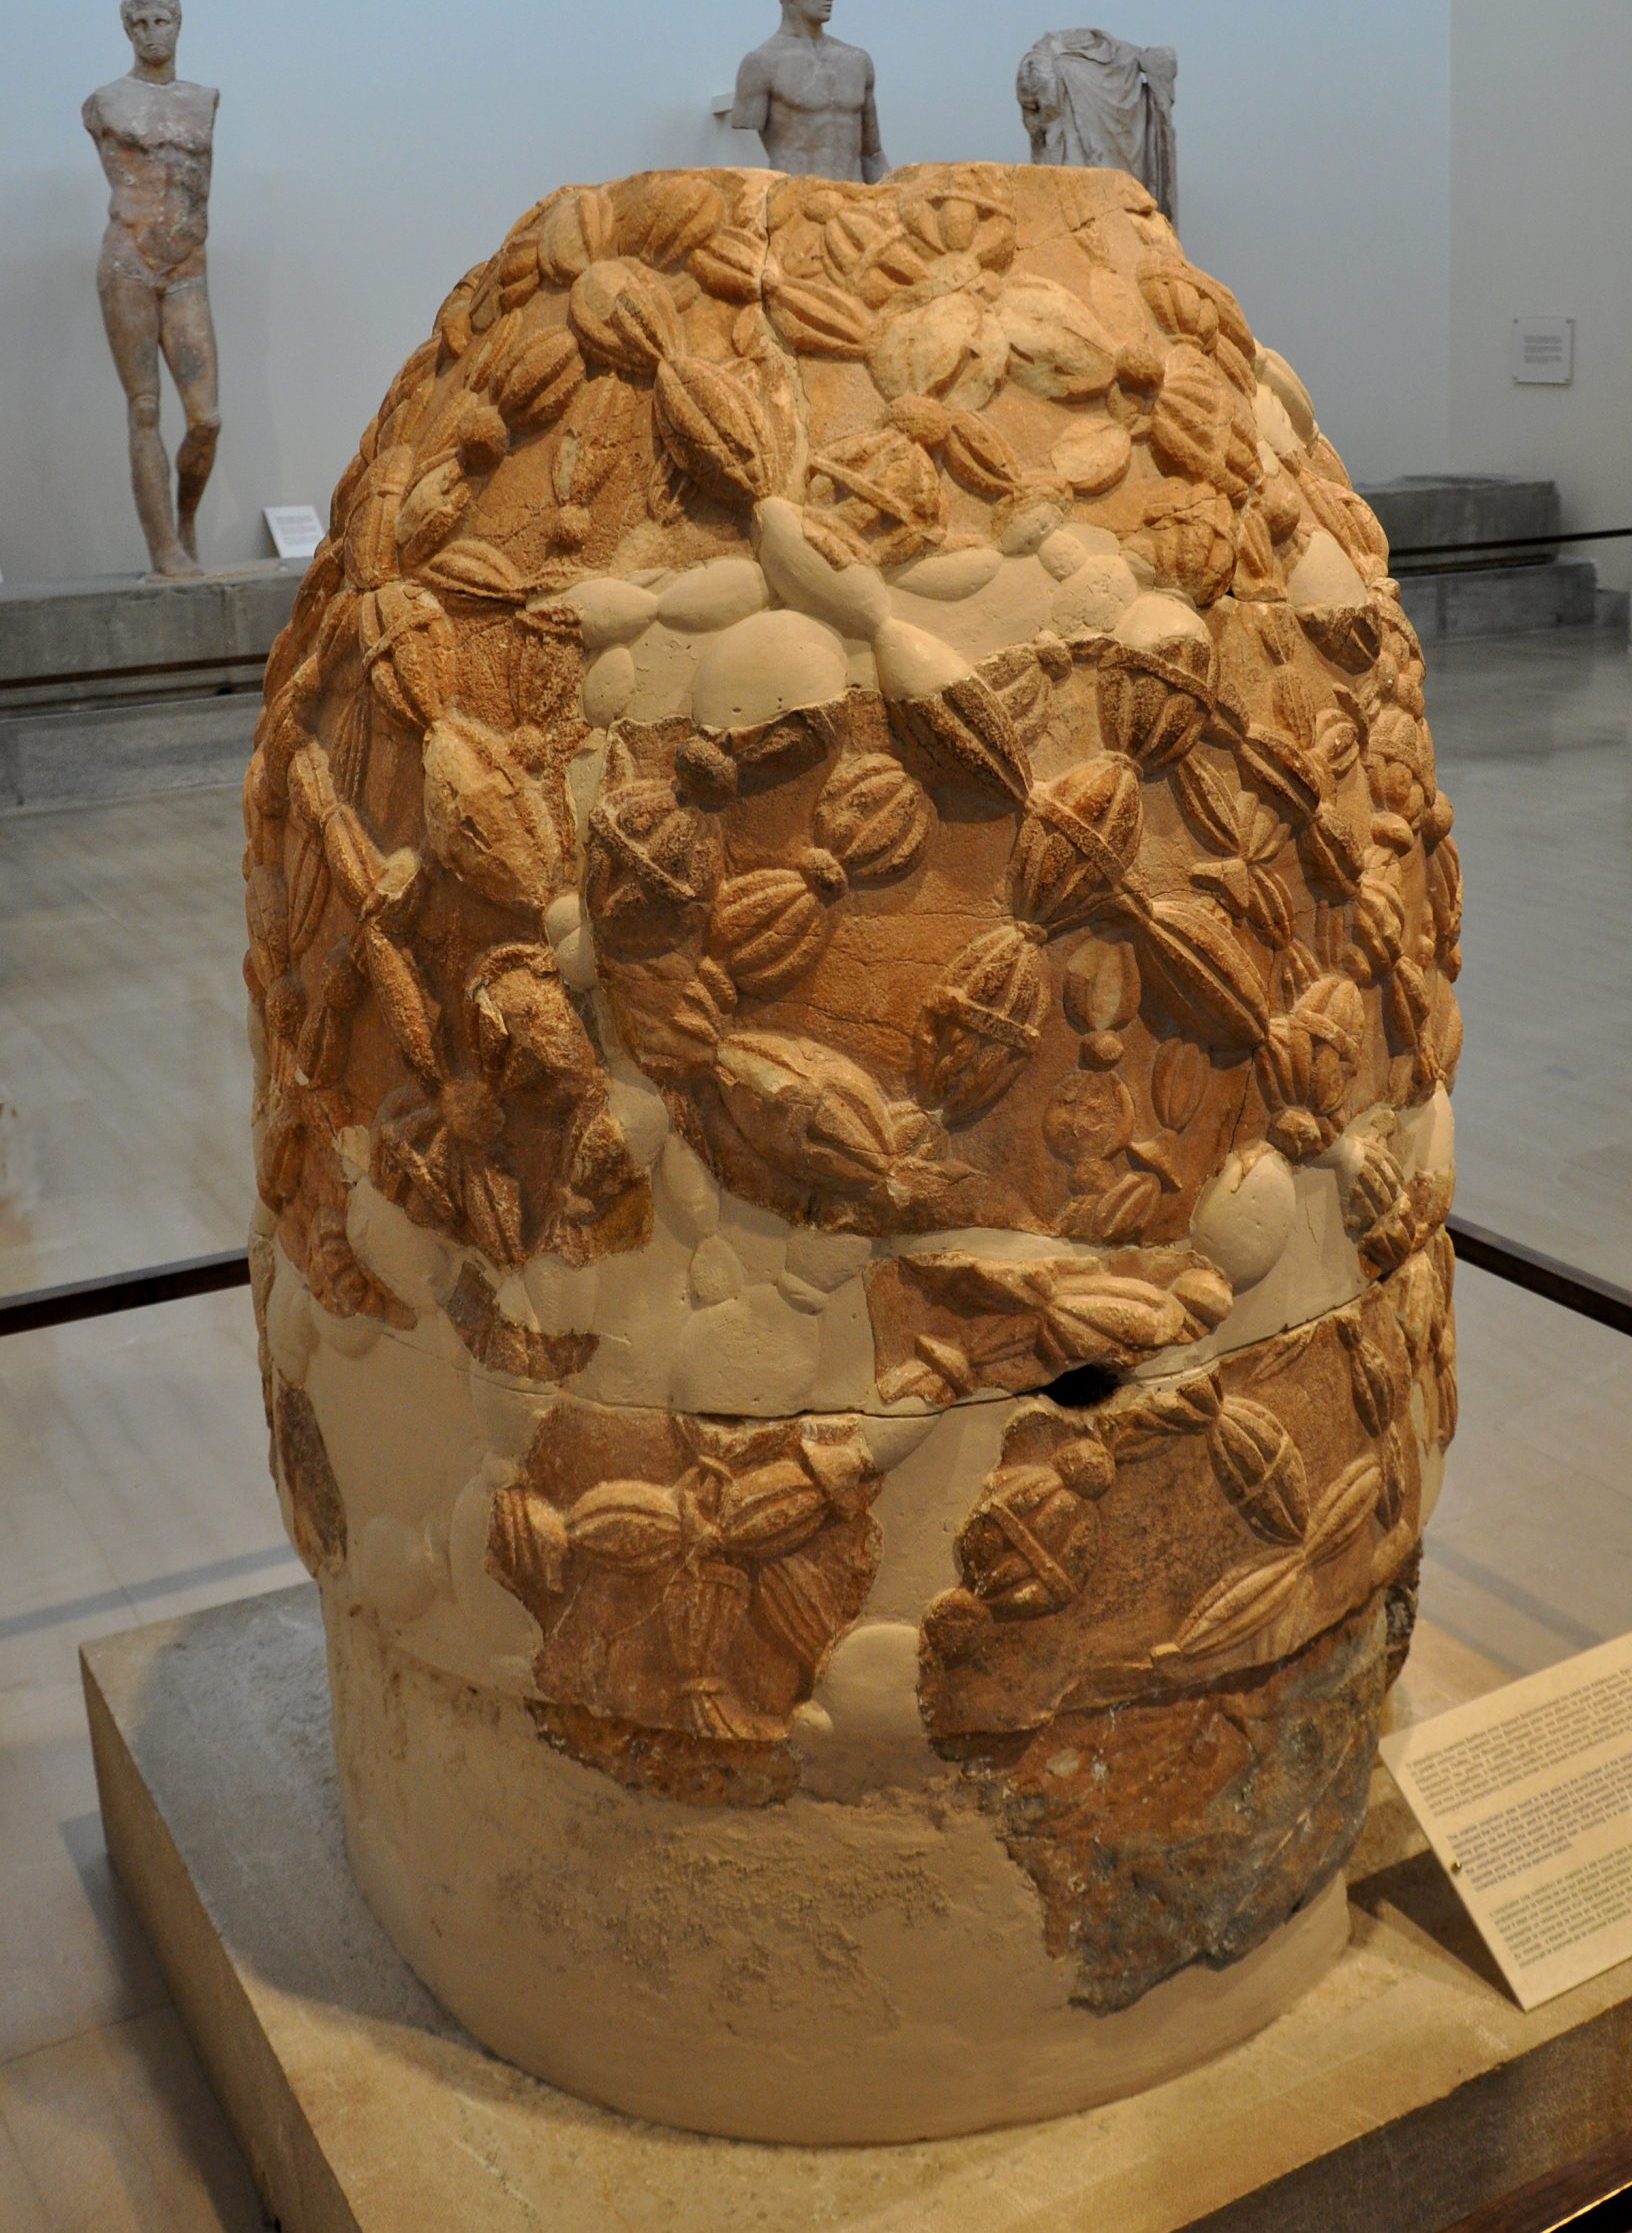 A large, bullet-shaped red terracotta sculpture, embossed with knot-like woven patterns.